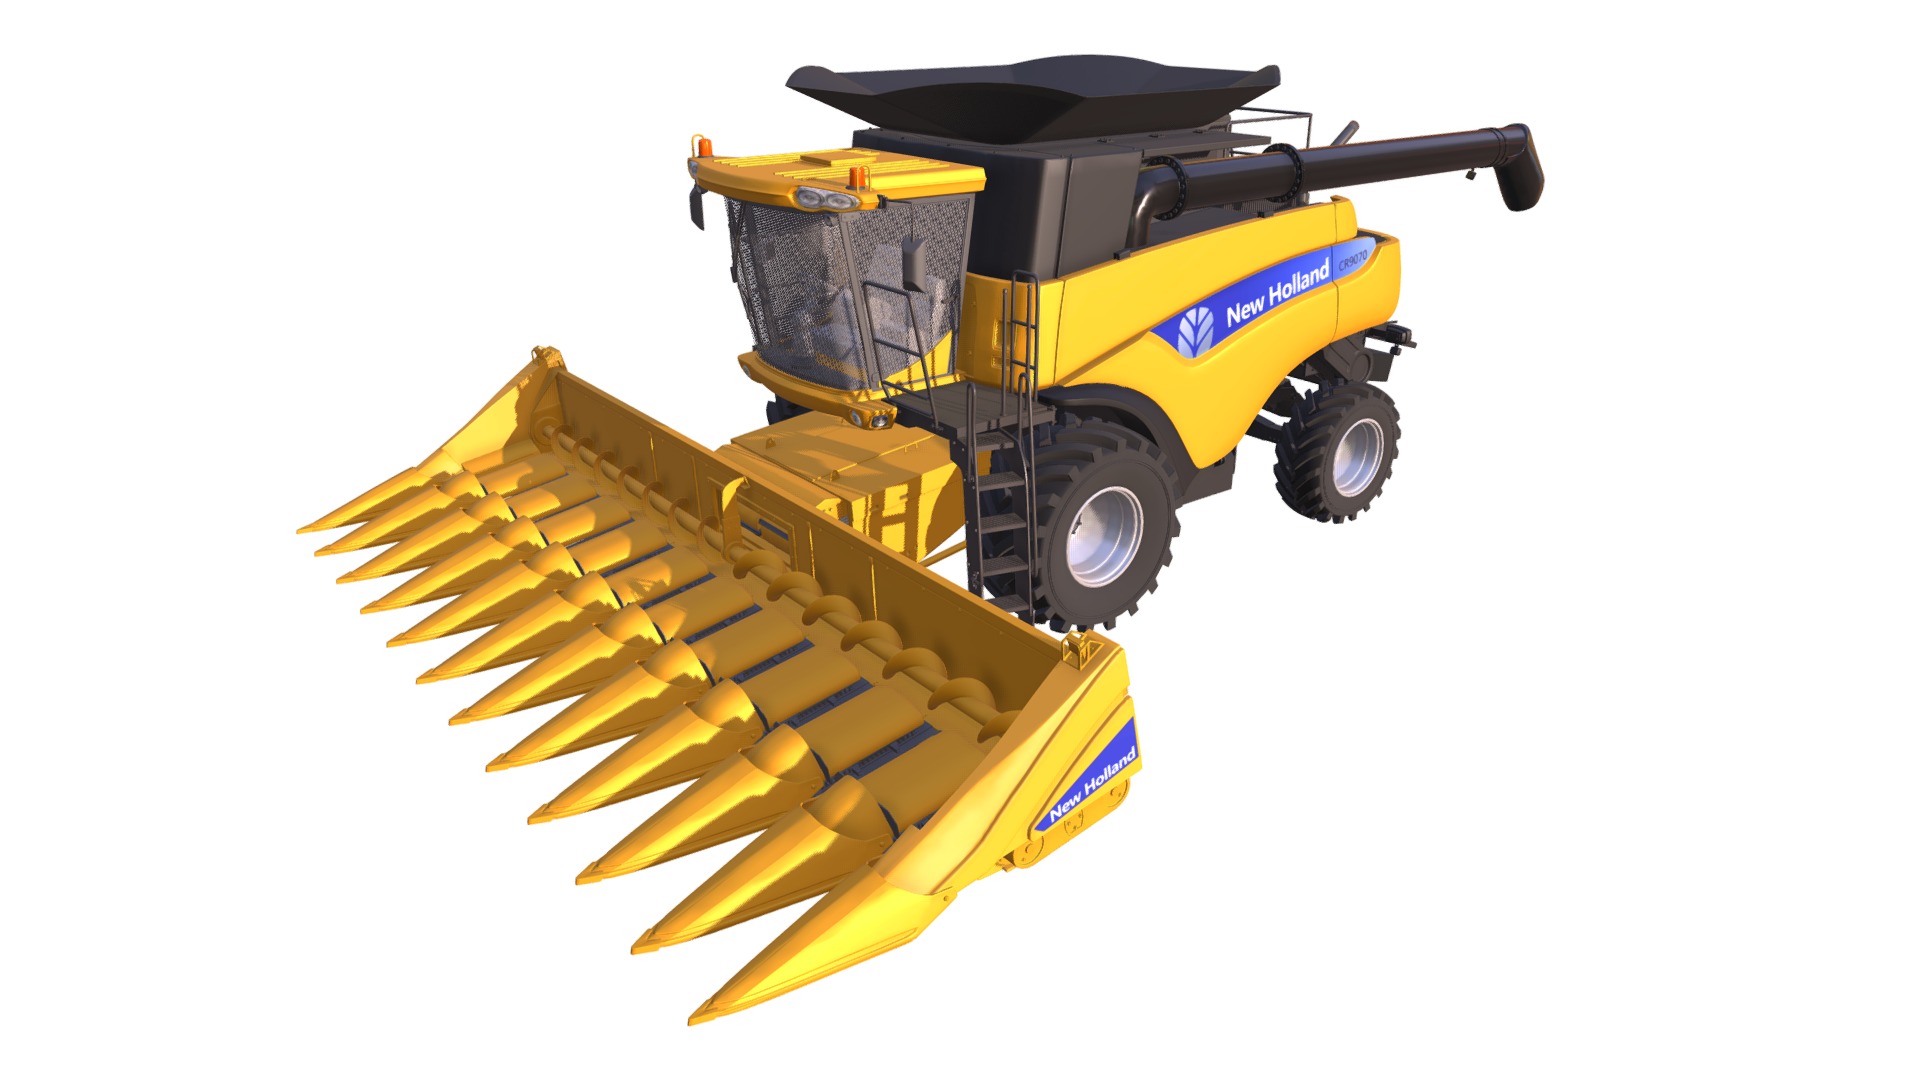 3D model New Holland Combine Harvester - This is a 3D model of the New Holland Combine Harvester. The 3D model is about a yellow and blue construction vehicle.